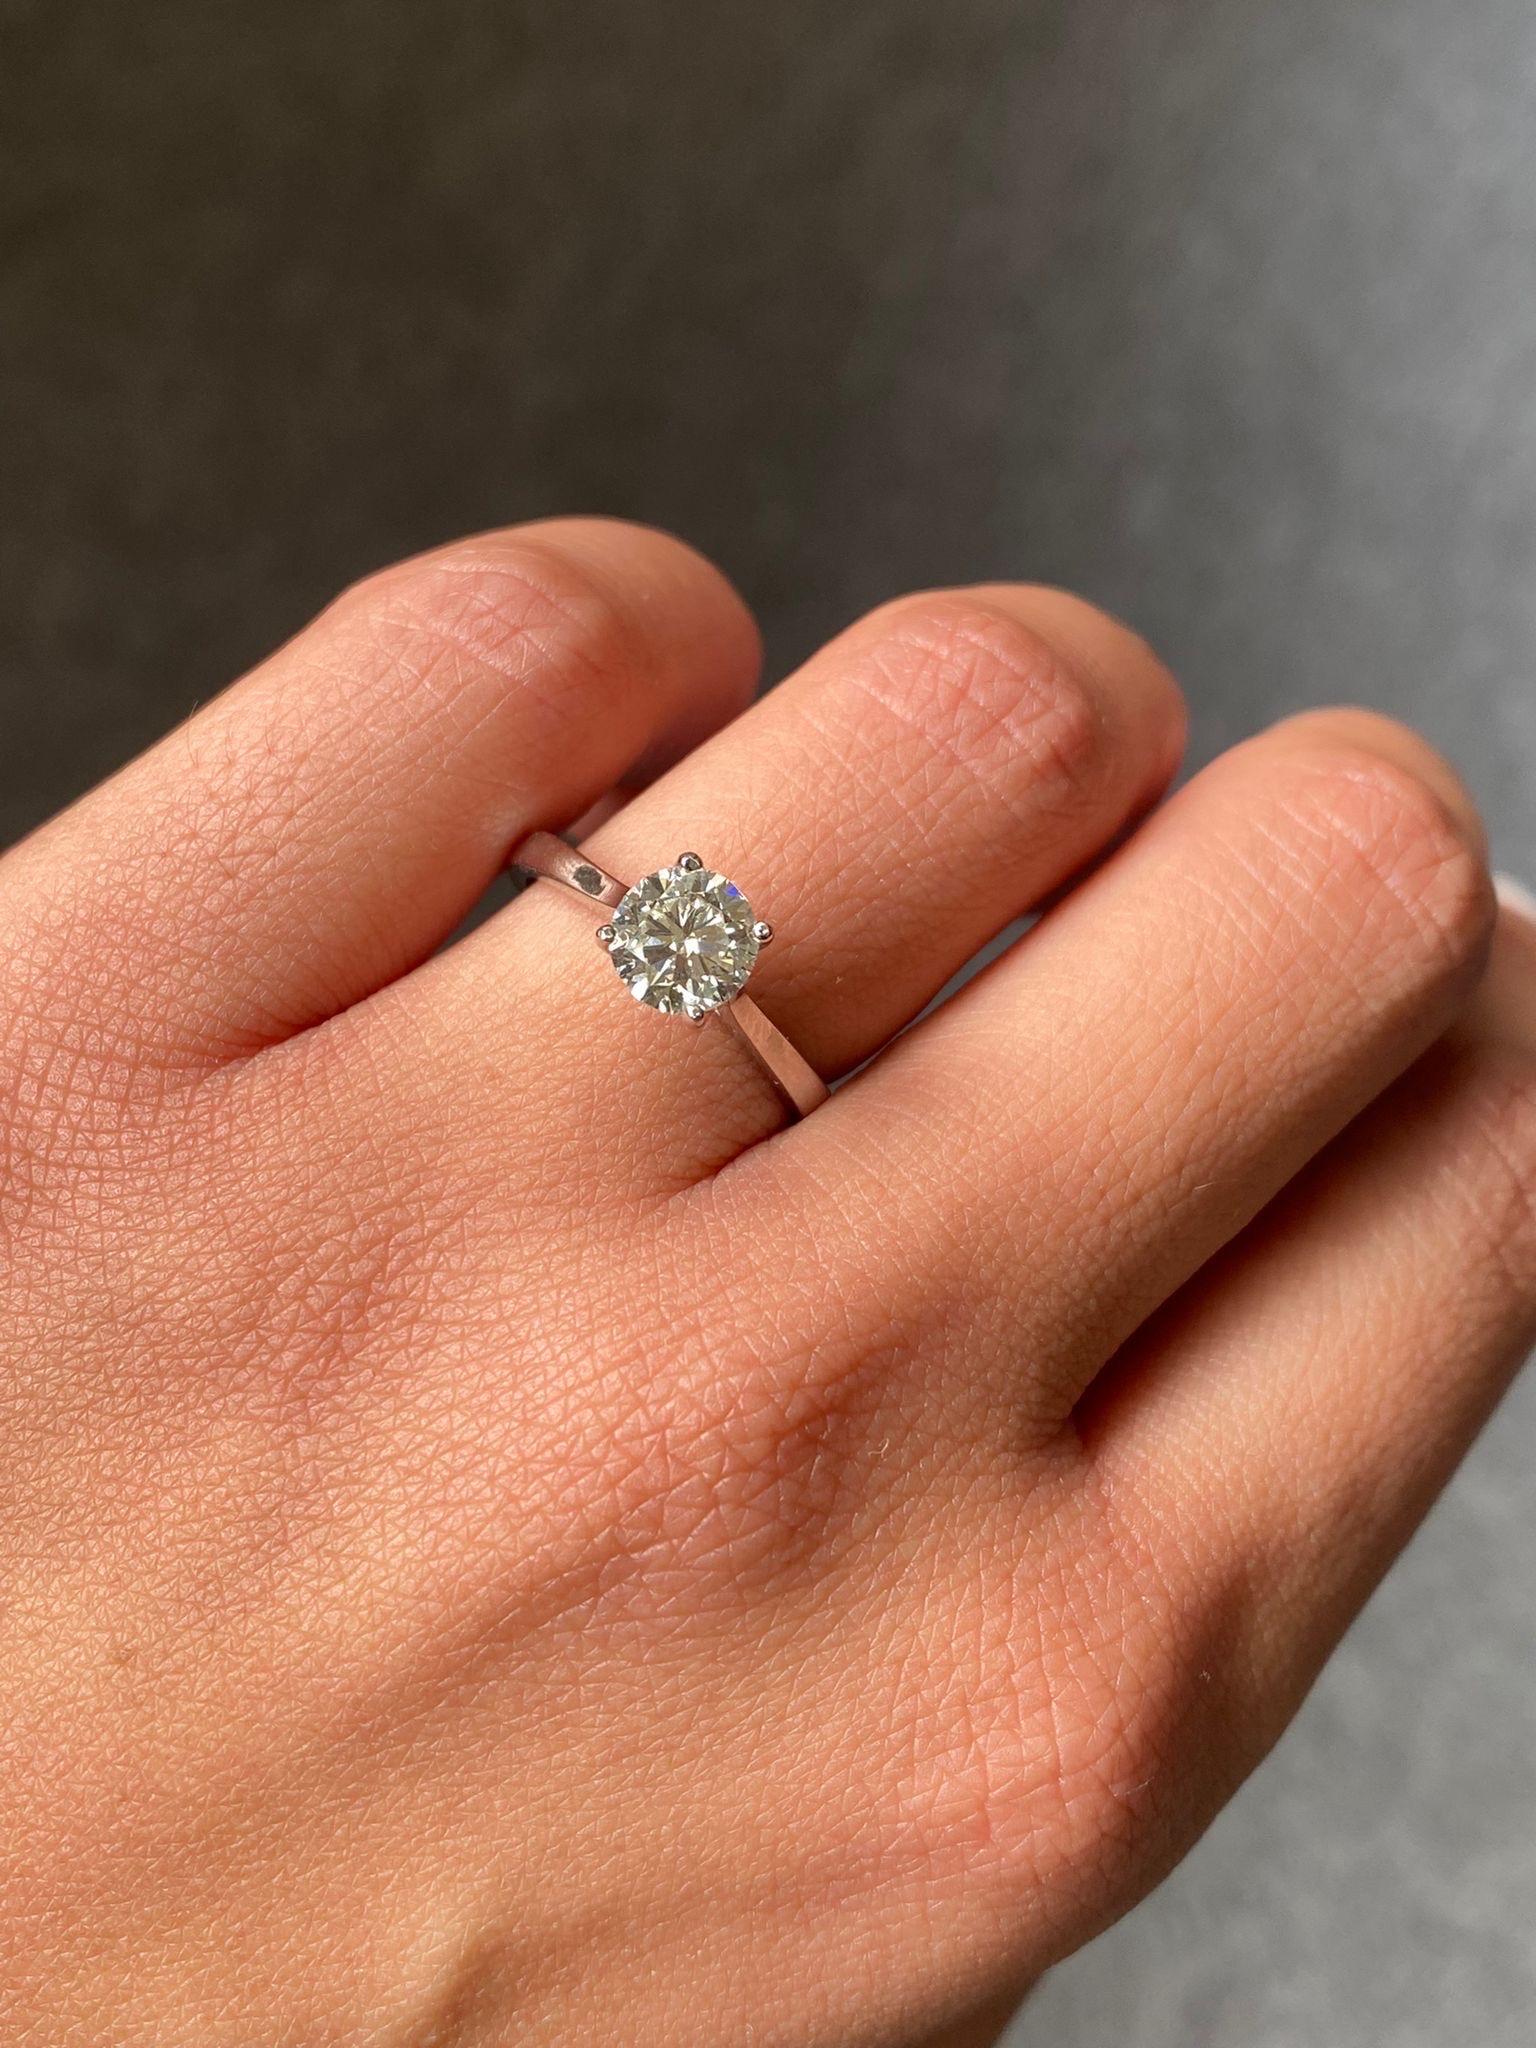 Certified 1.01 Carat Diamond Solitaire Engagement Ring, VS Quality In New Condition For Sale In Bangkok, Thailand